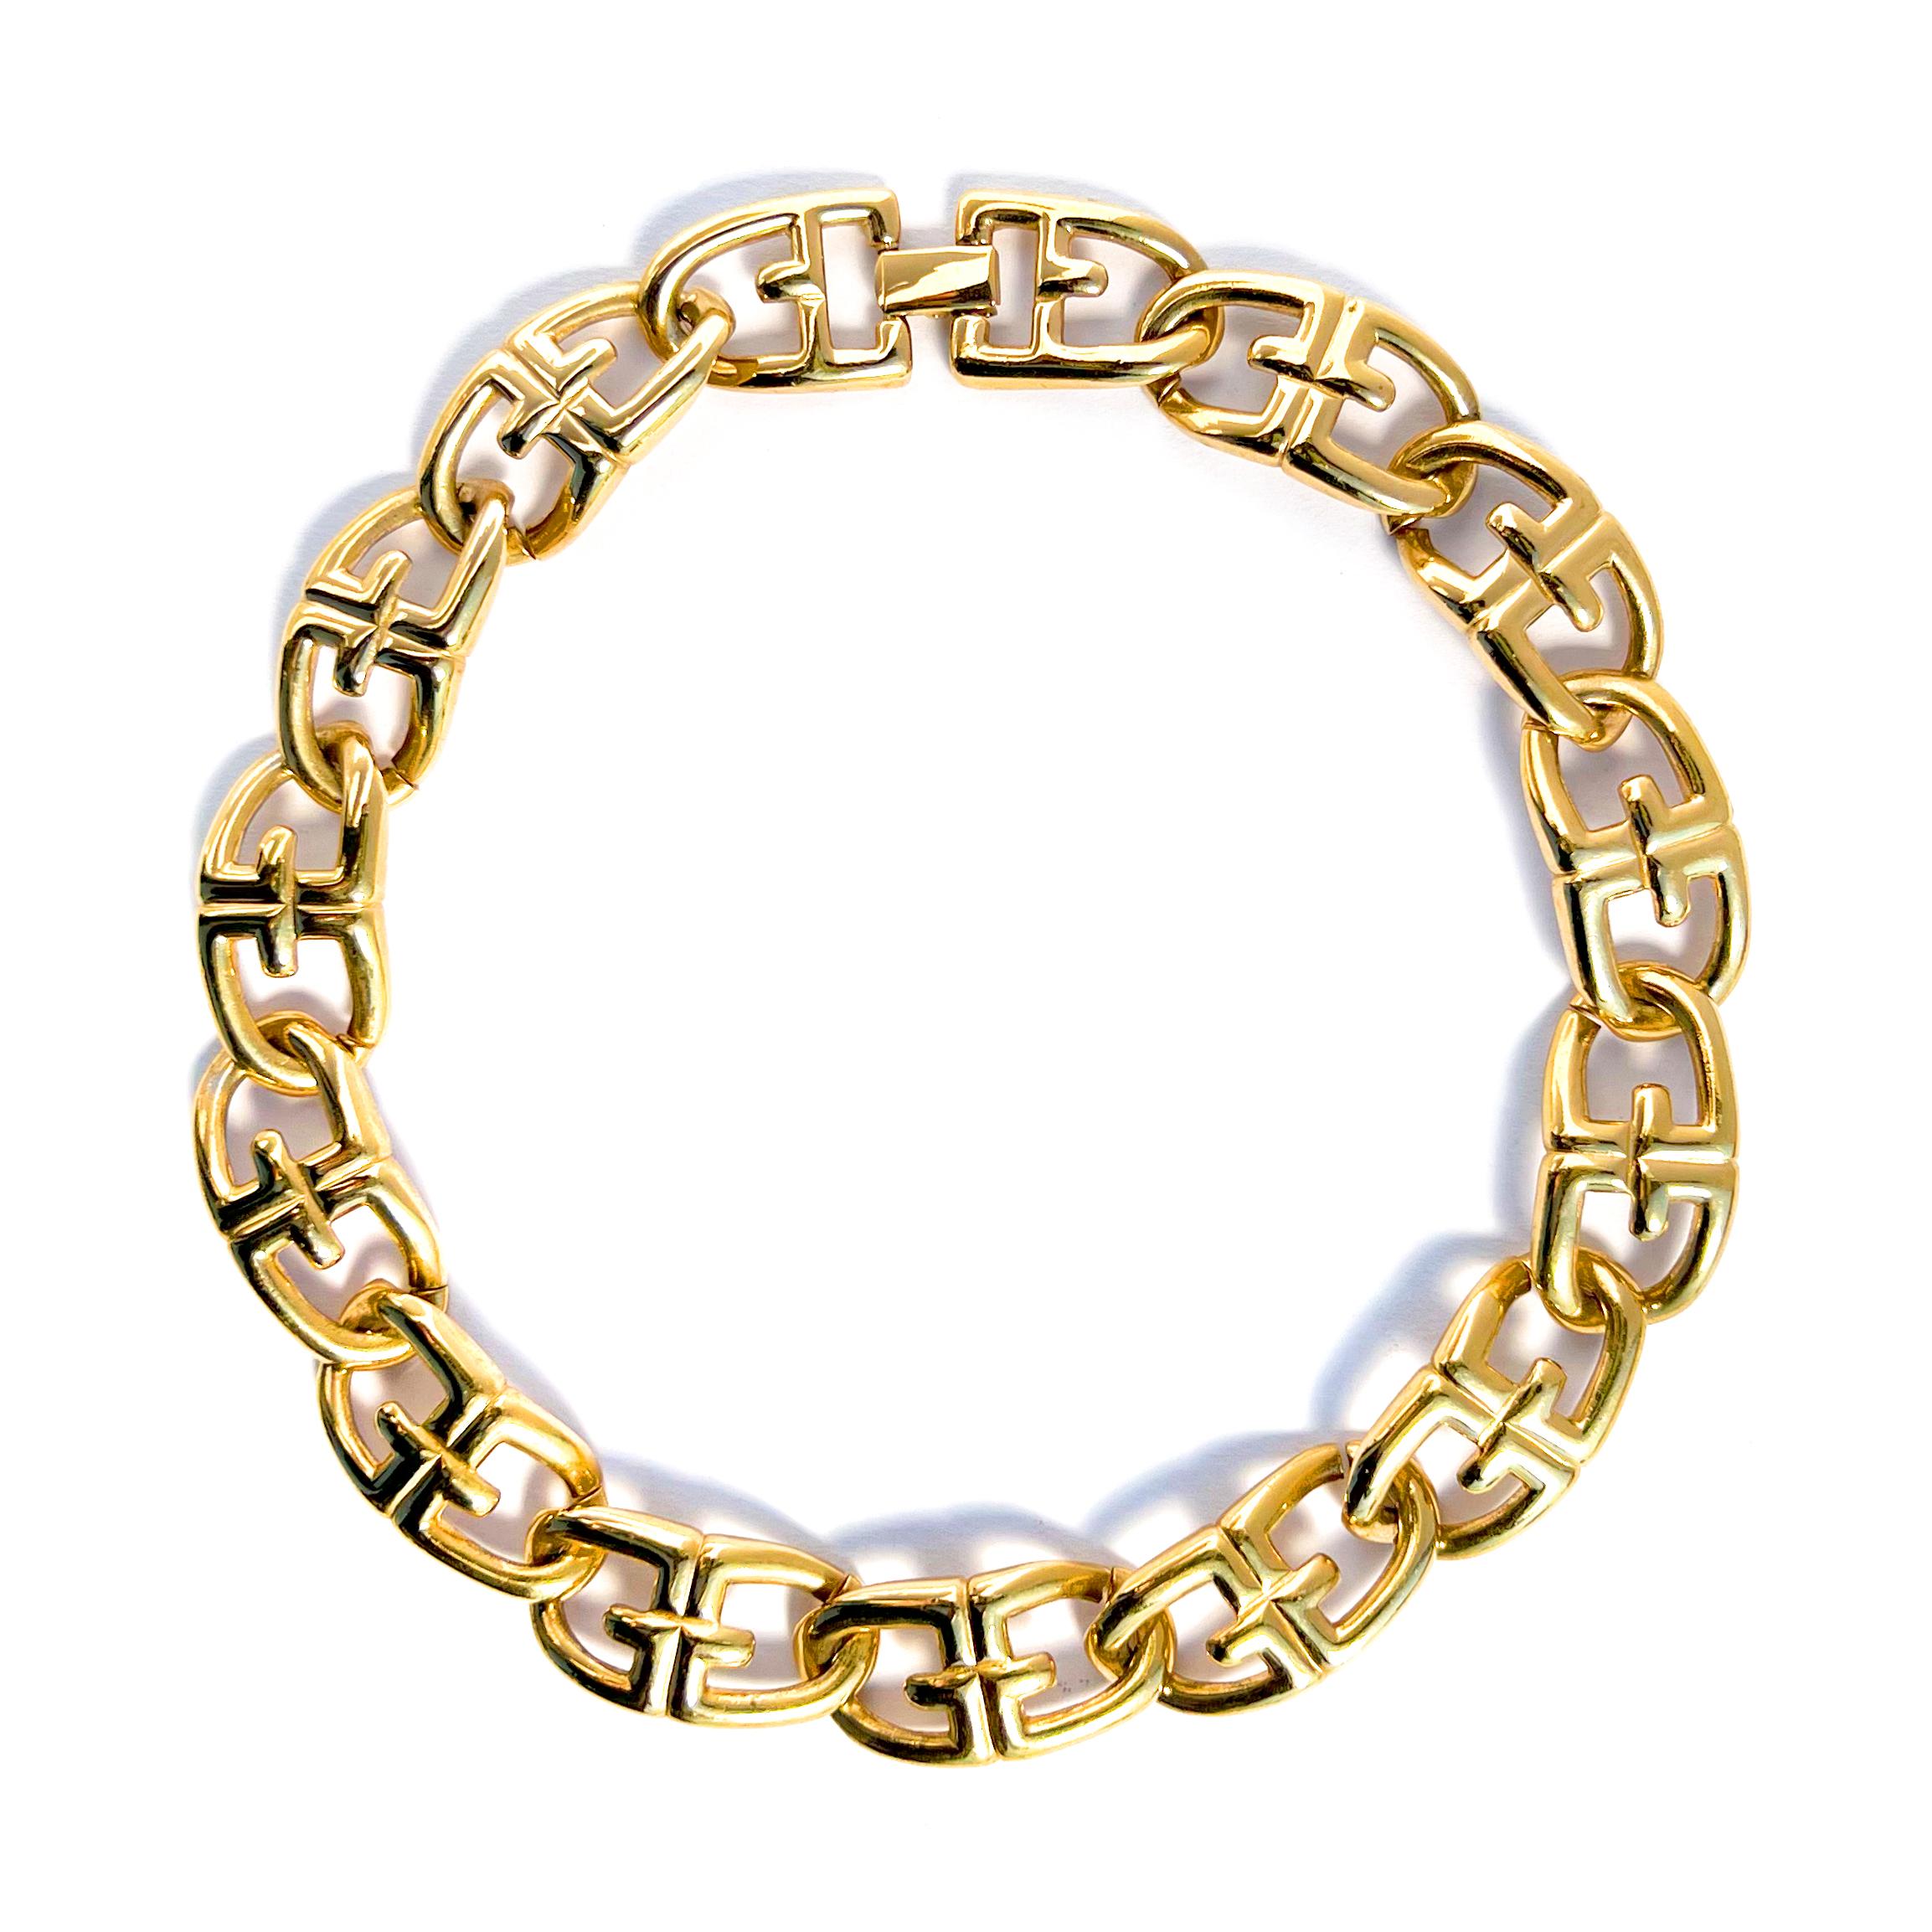 Vintage 1990s Givenchy statement logo link chain necklace in gold plate.  This choker length heritage necklace comprises interlocking puffy double G Givenchy logo links with a foldover closure.  Necklace measures 17 inches in length with each link